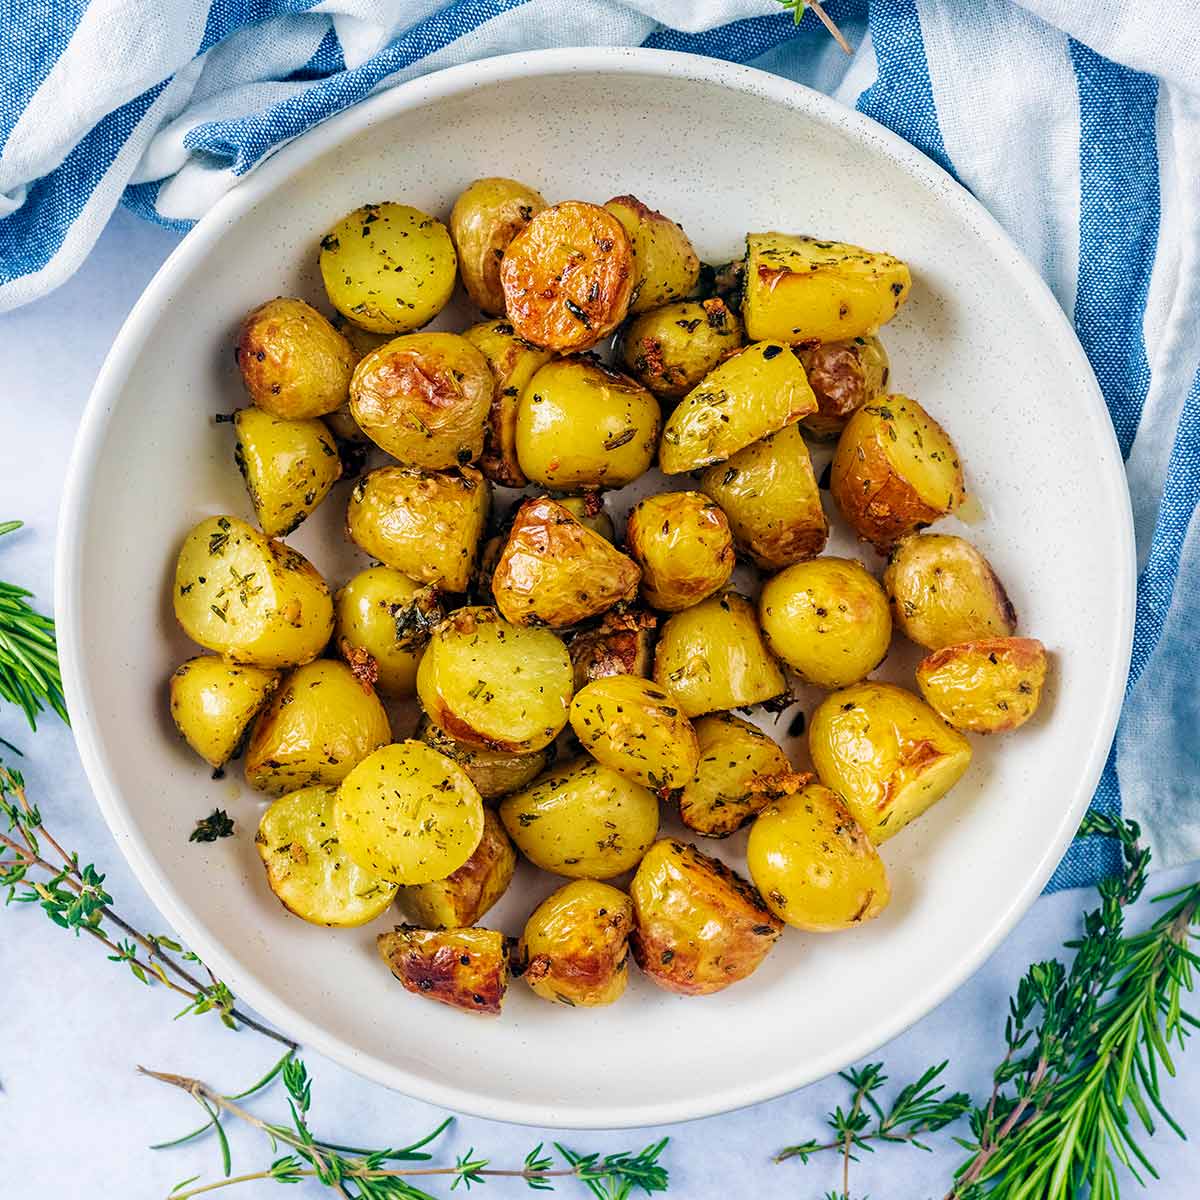 https://hungryhealthyhappy.com/wp-content/uploads/2022/05/Roasted-New-Potatoes-featured.jpg